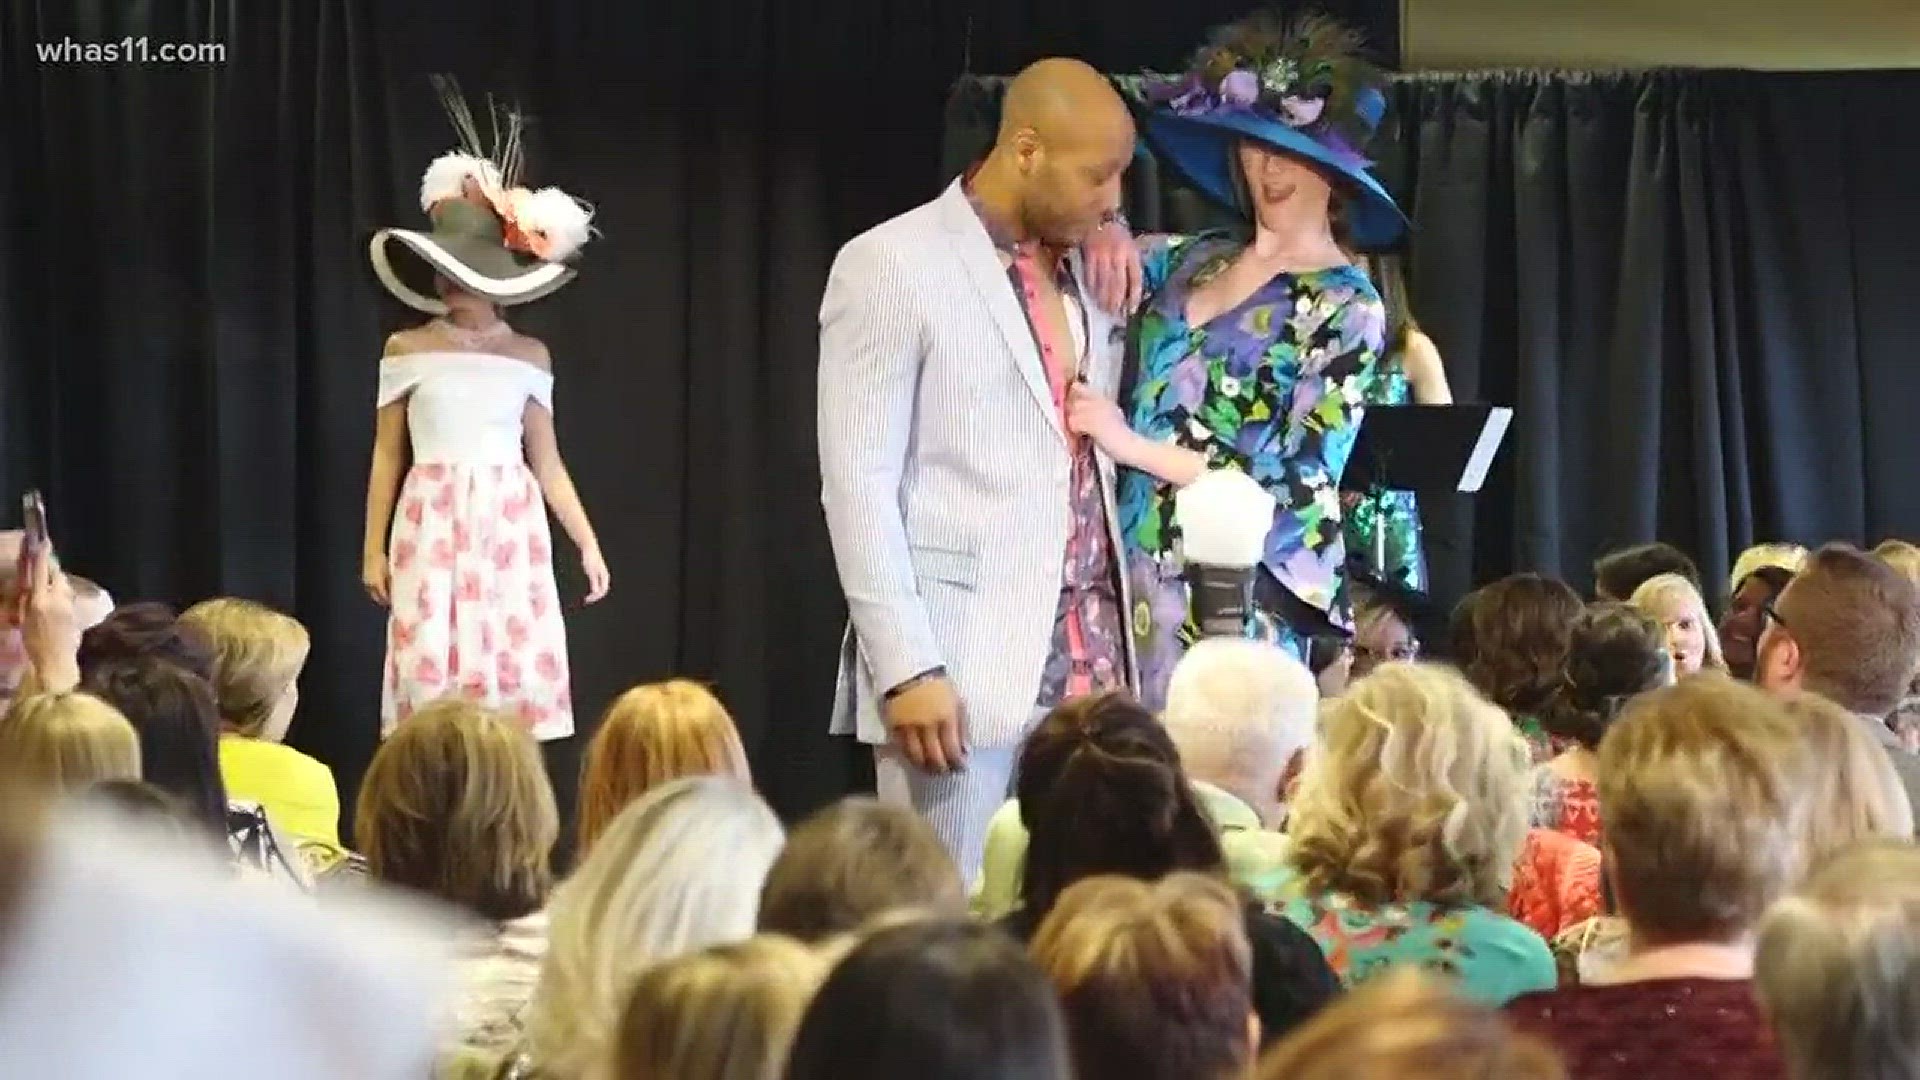 Cancer survivors strut their stuff during Pearls and Pumps fashion show